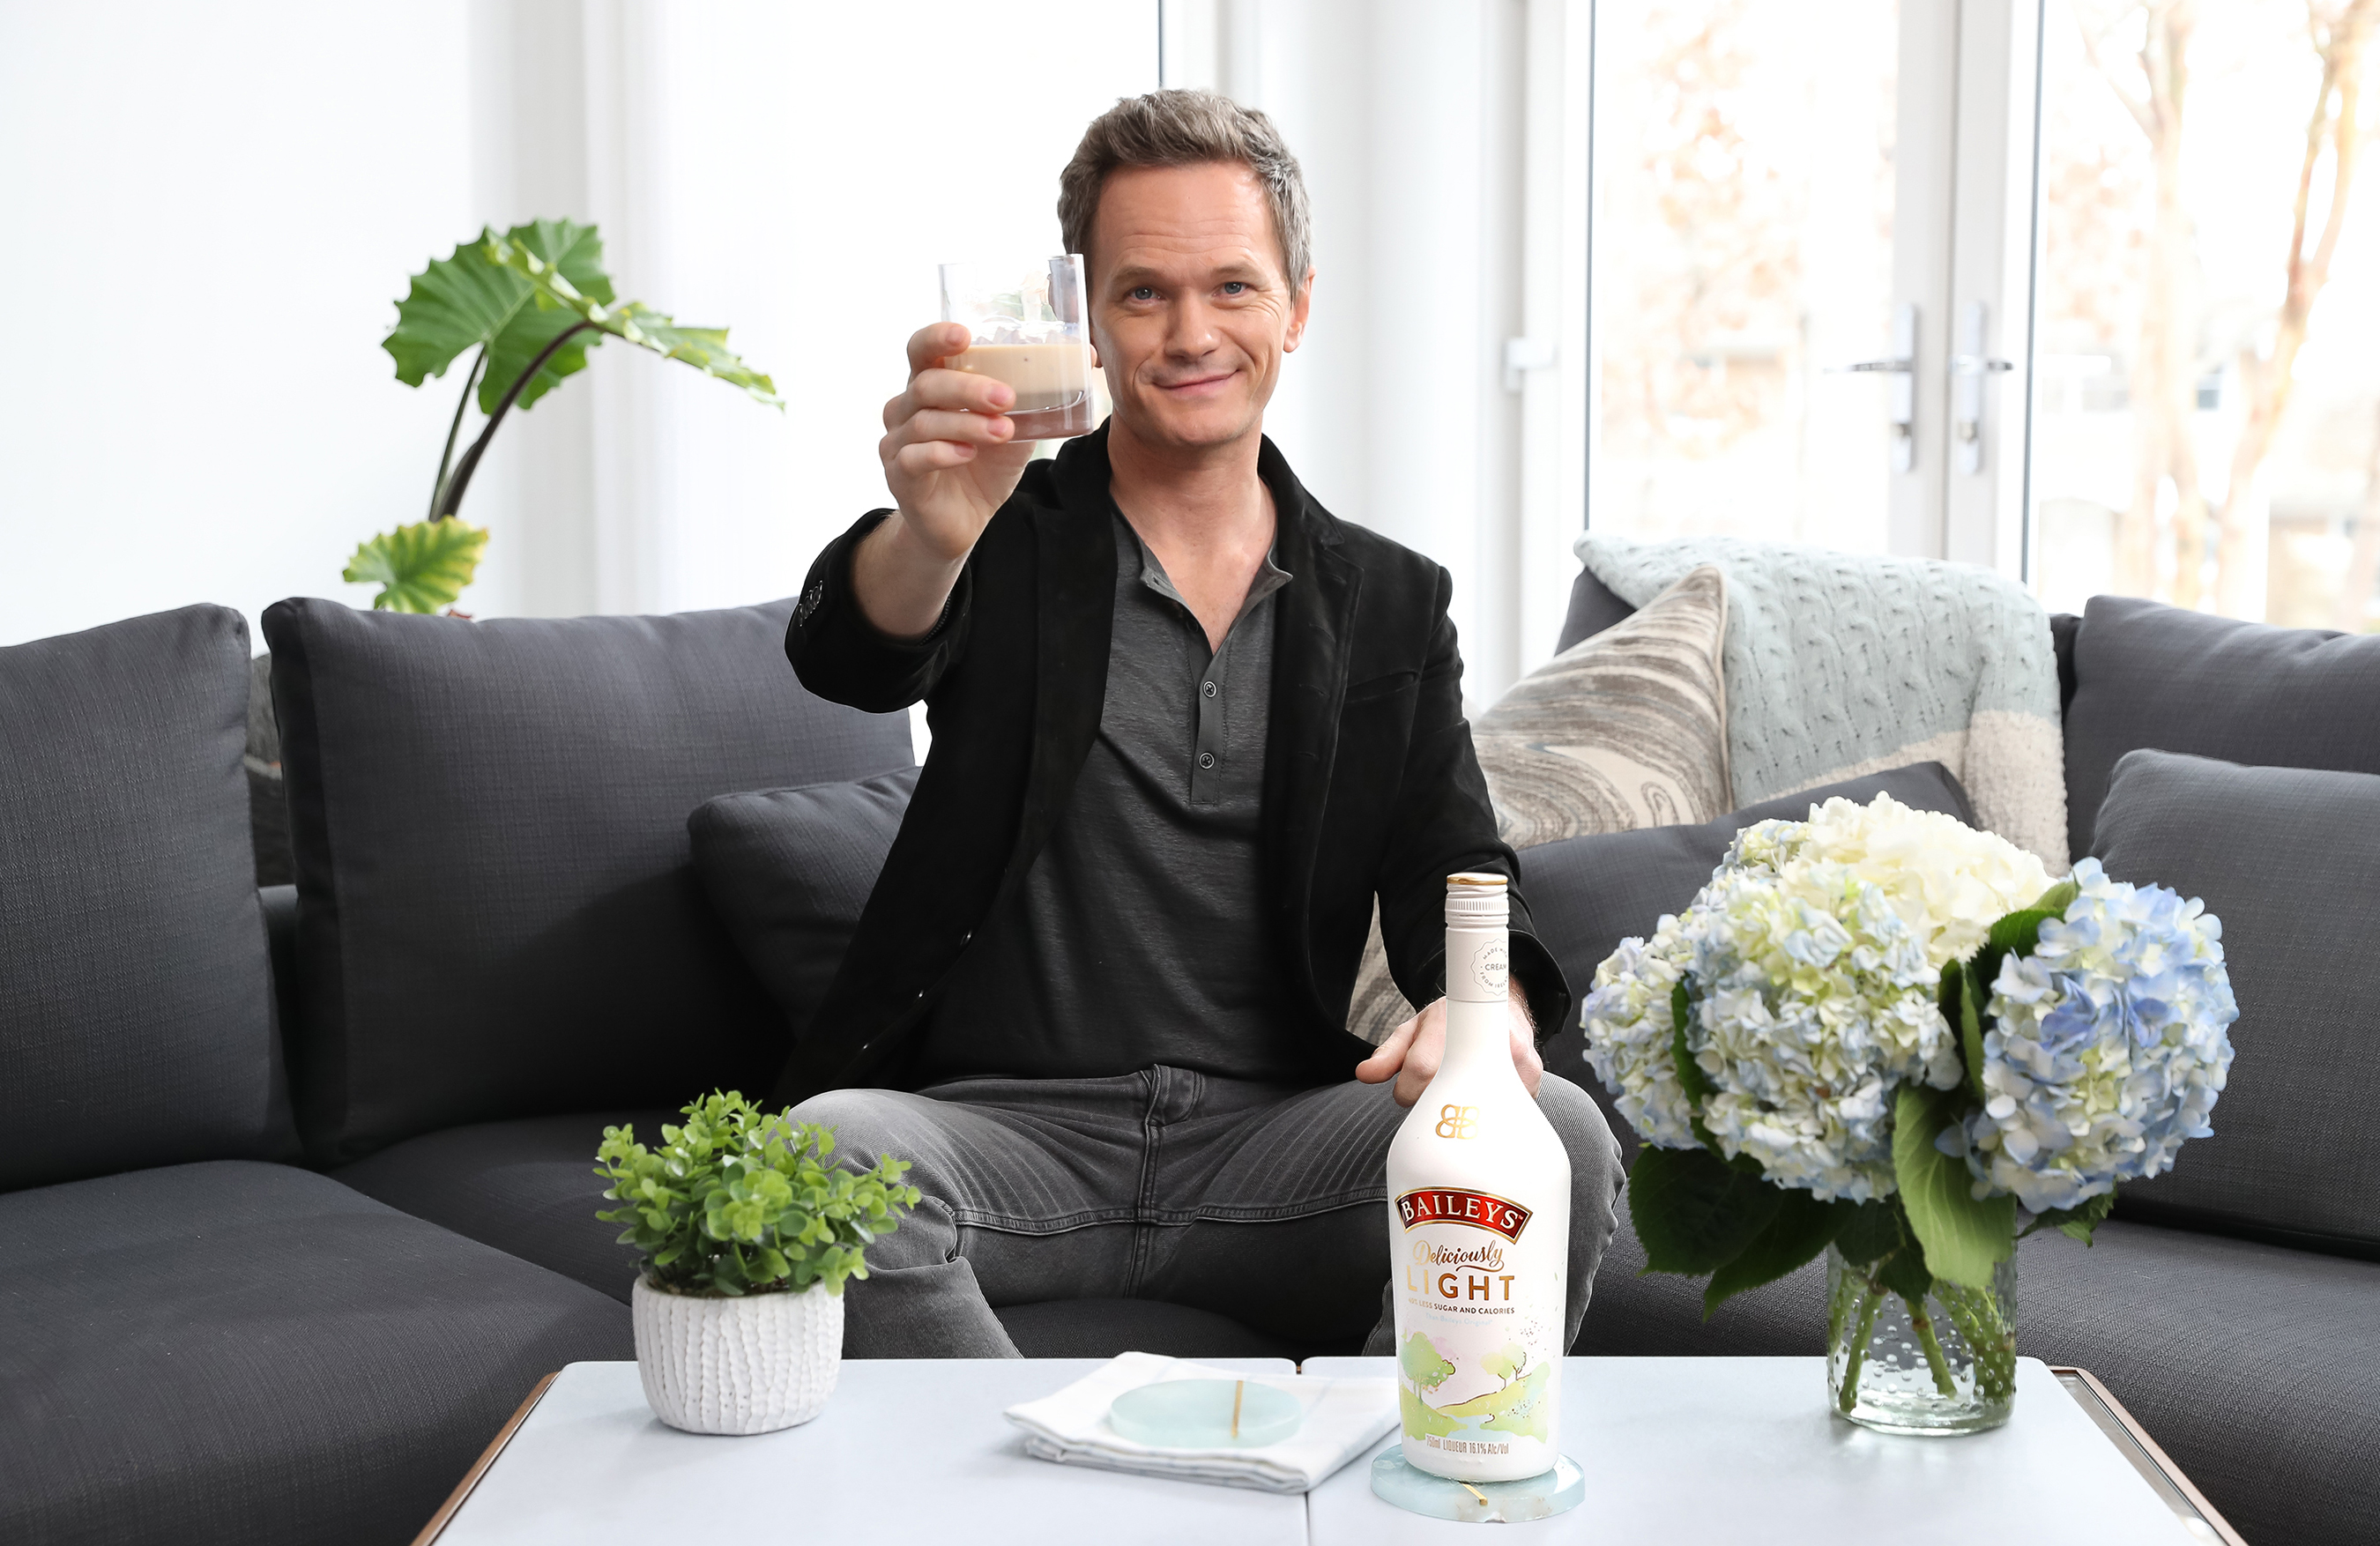 Neil Patrick Harris Treats Himself to a Light Break with the New Baileys Deliciously Light